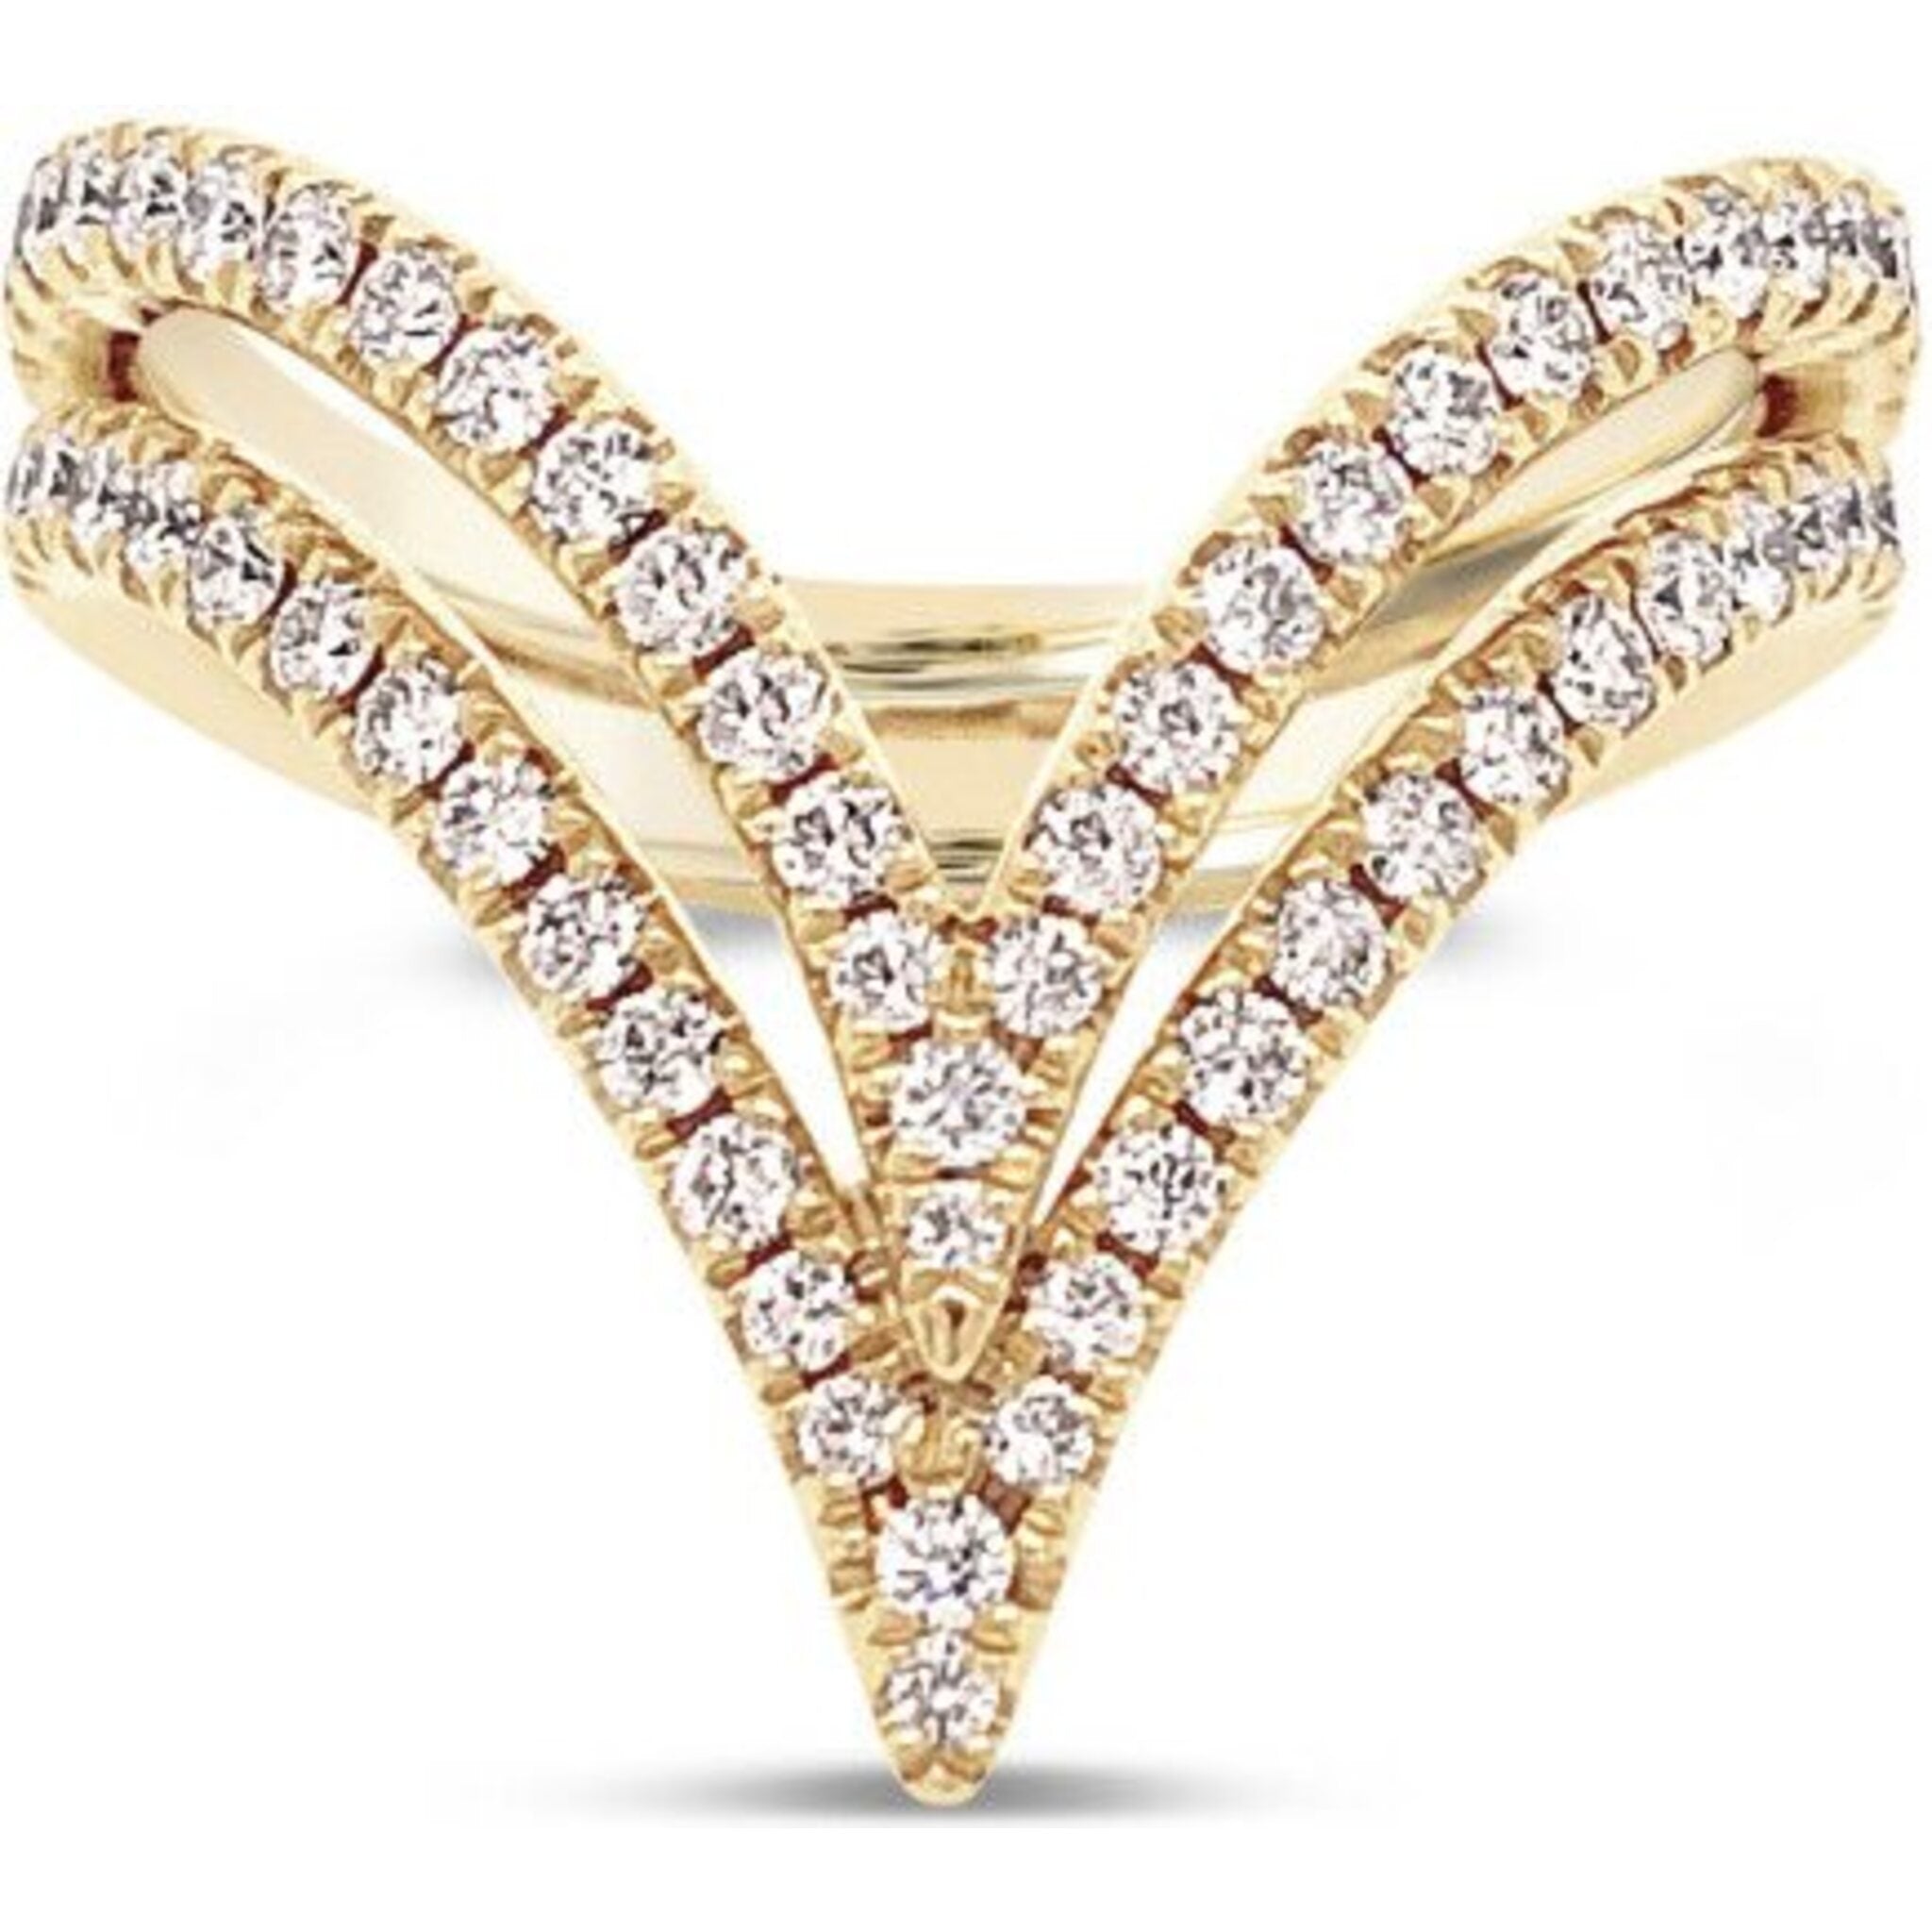 Charles Krypell - Diamond Double V Ring - Yellow Gold and Diamond